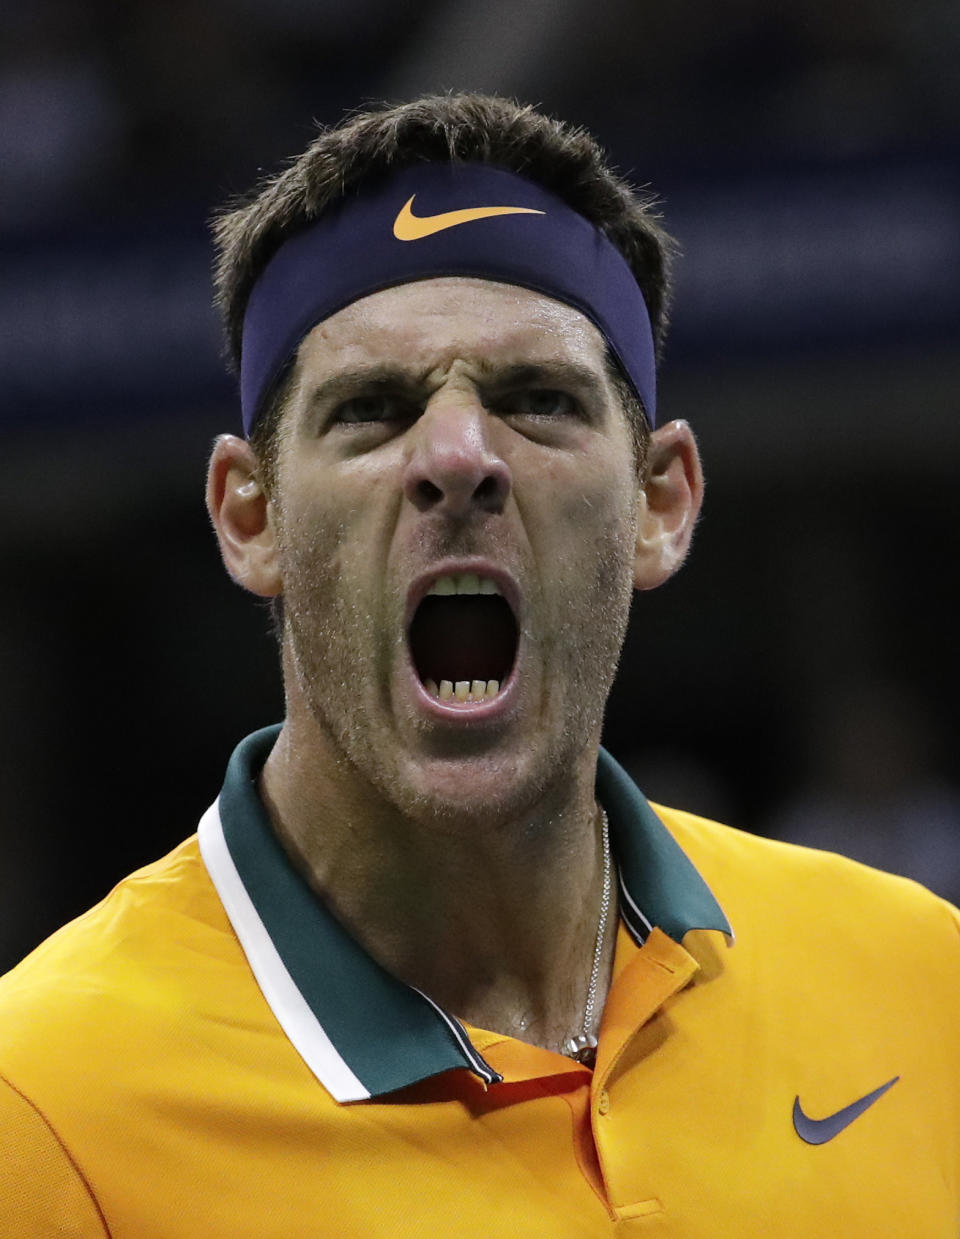 Juan Martin del Potro, of Argentina, reacts after breaking the serve of Novak Djokovic, of Serbia, during the men's final of the U.S. Open tennis tournament, Sunday, Sept. 9, 2018, in New York. (AP Photo/Julio Cortez)